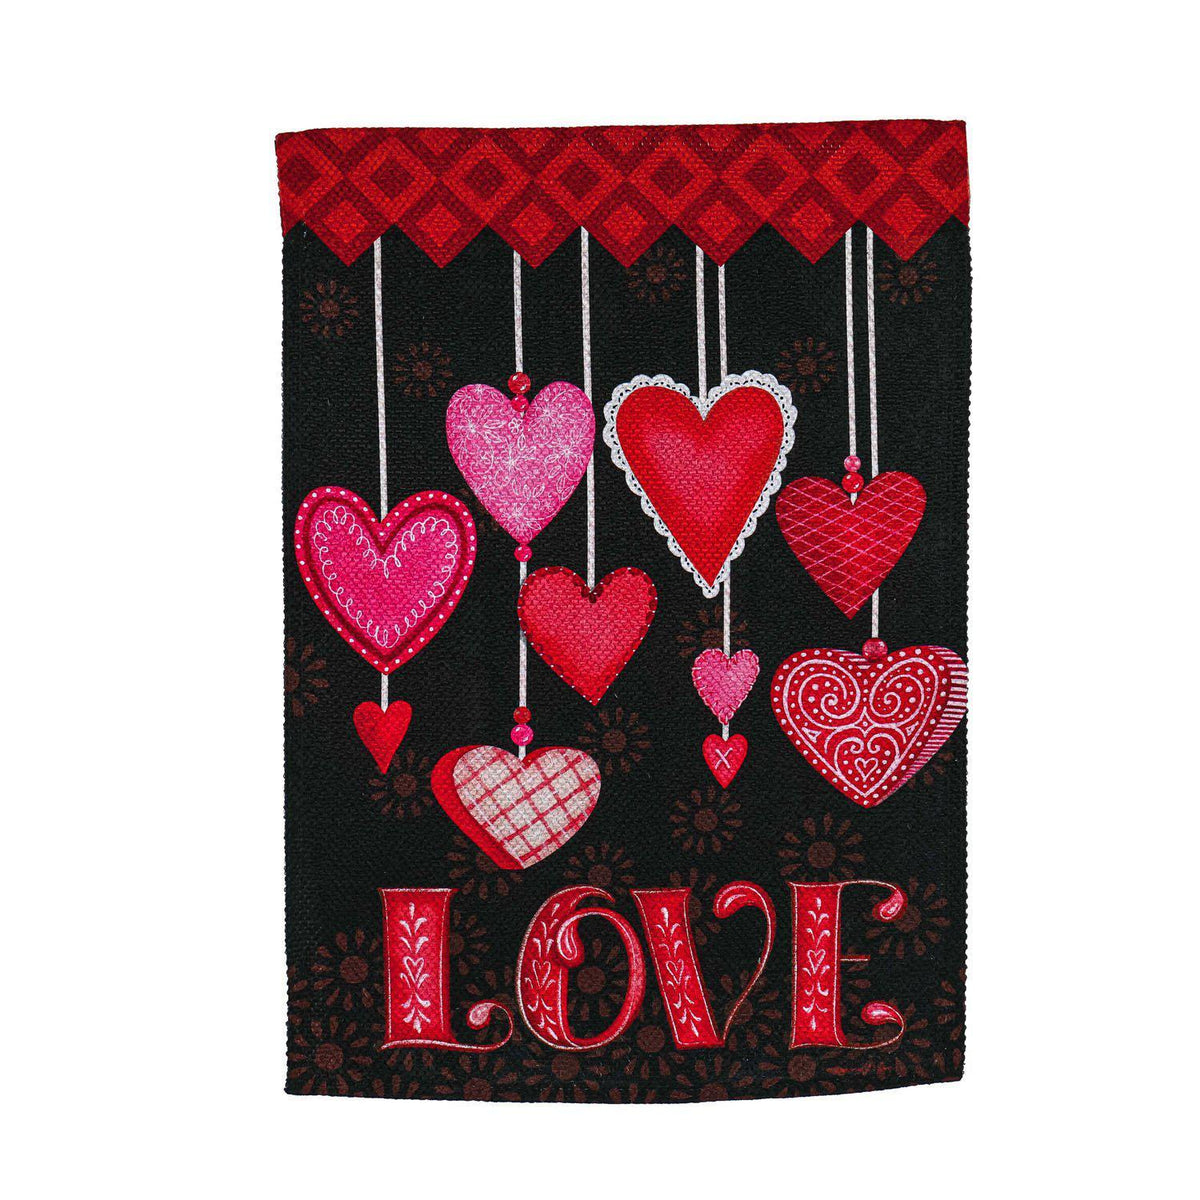 The Hanging Love Hearts house banner features pink, white, and red patterned hearts suspended over the word "Love". 